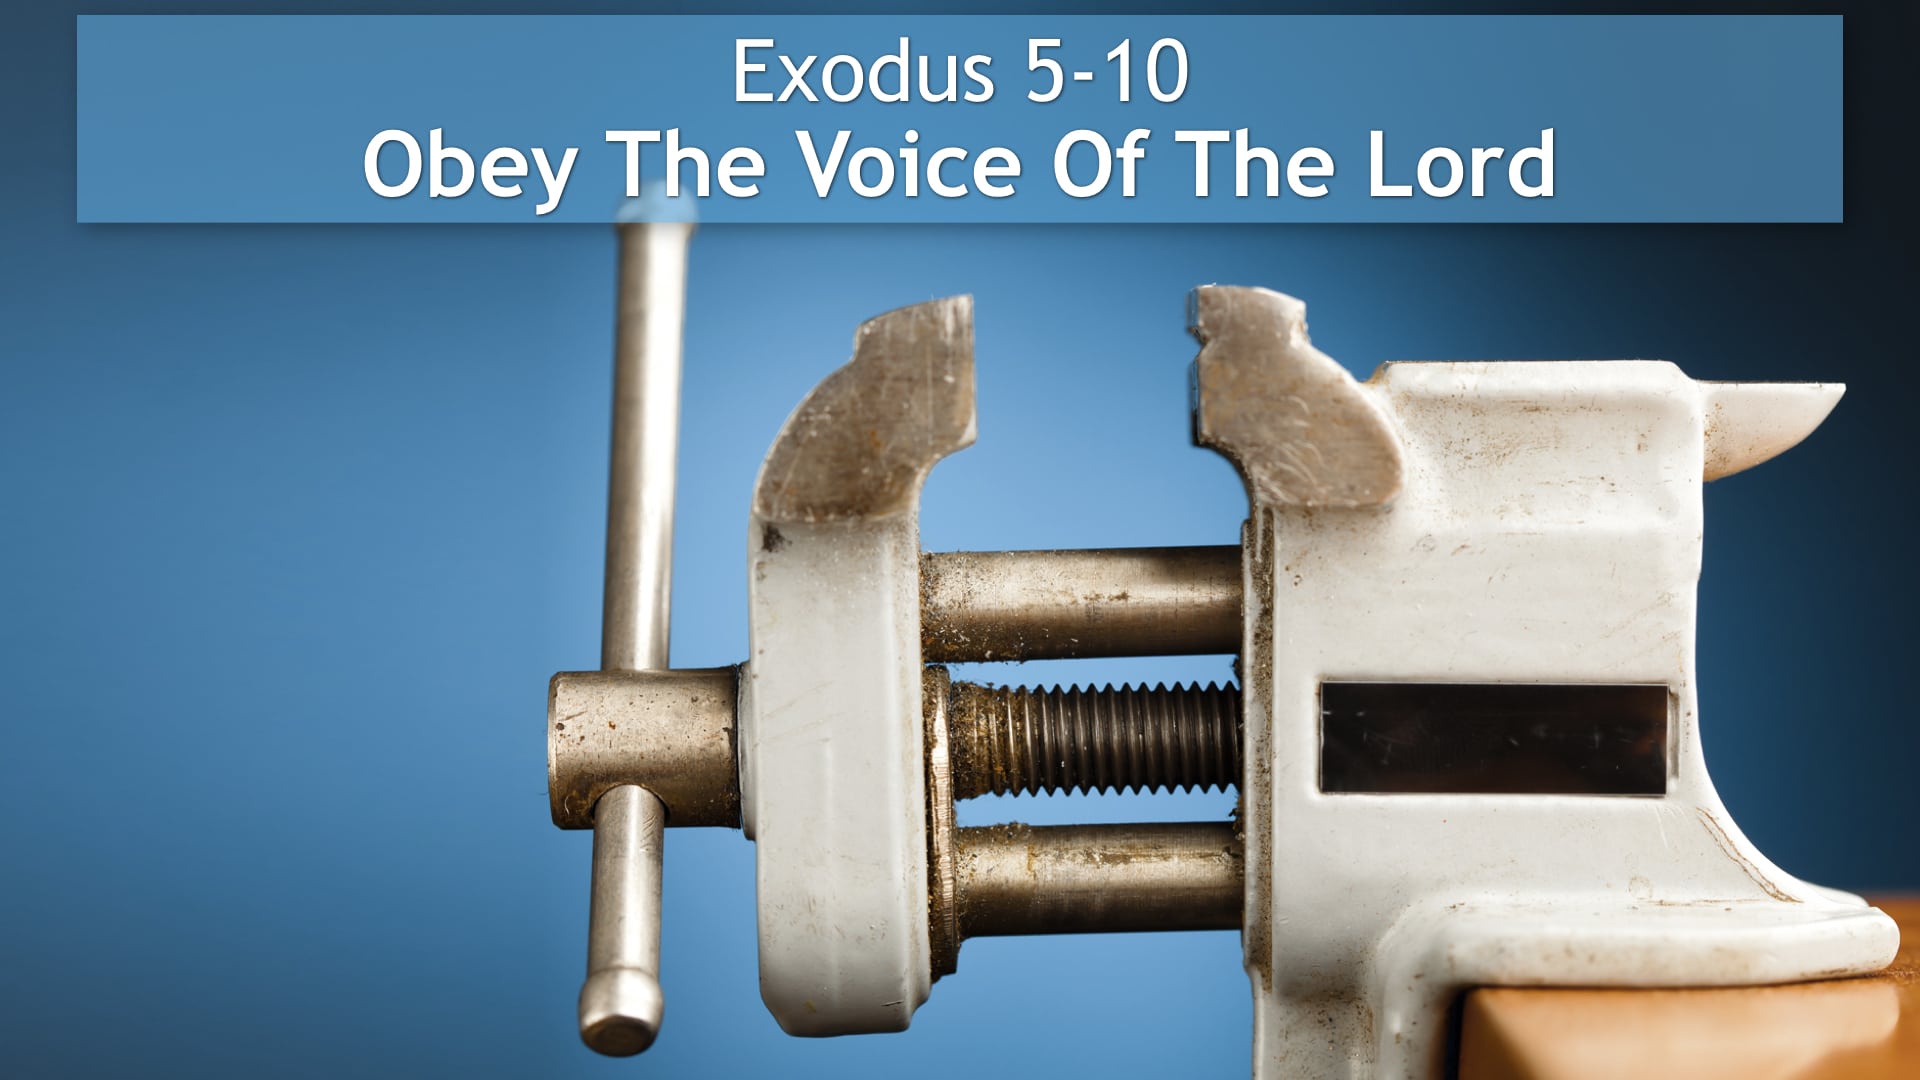 Jerry Simmons teaching Exodus 5-10, Obey The Voice Of The Lord